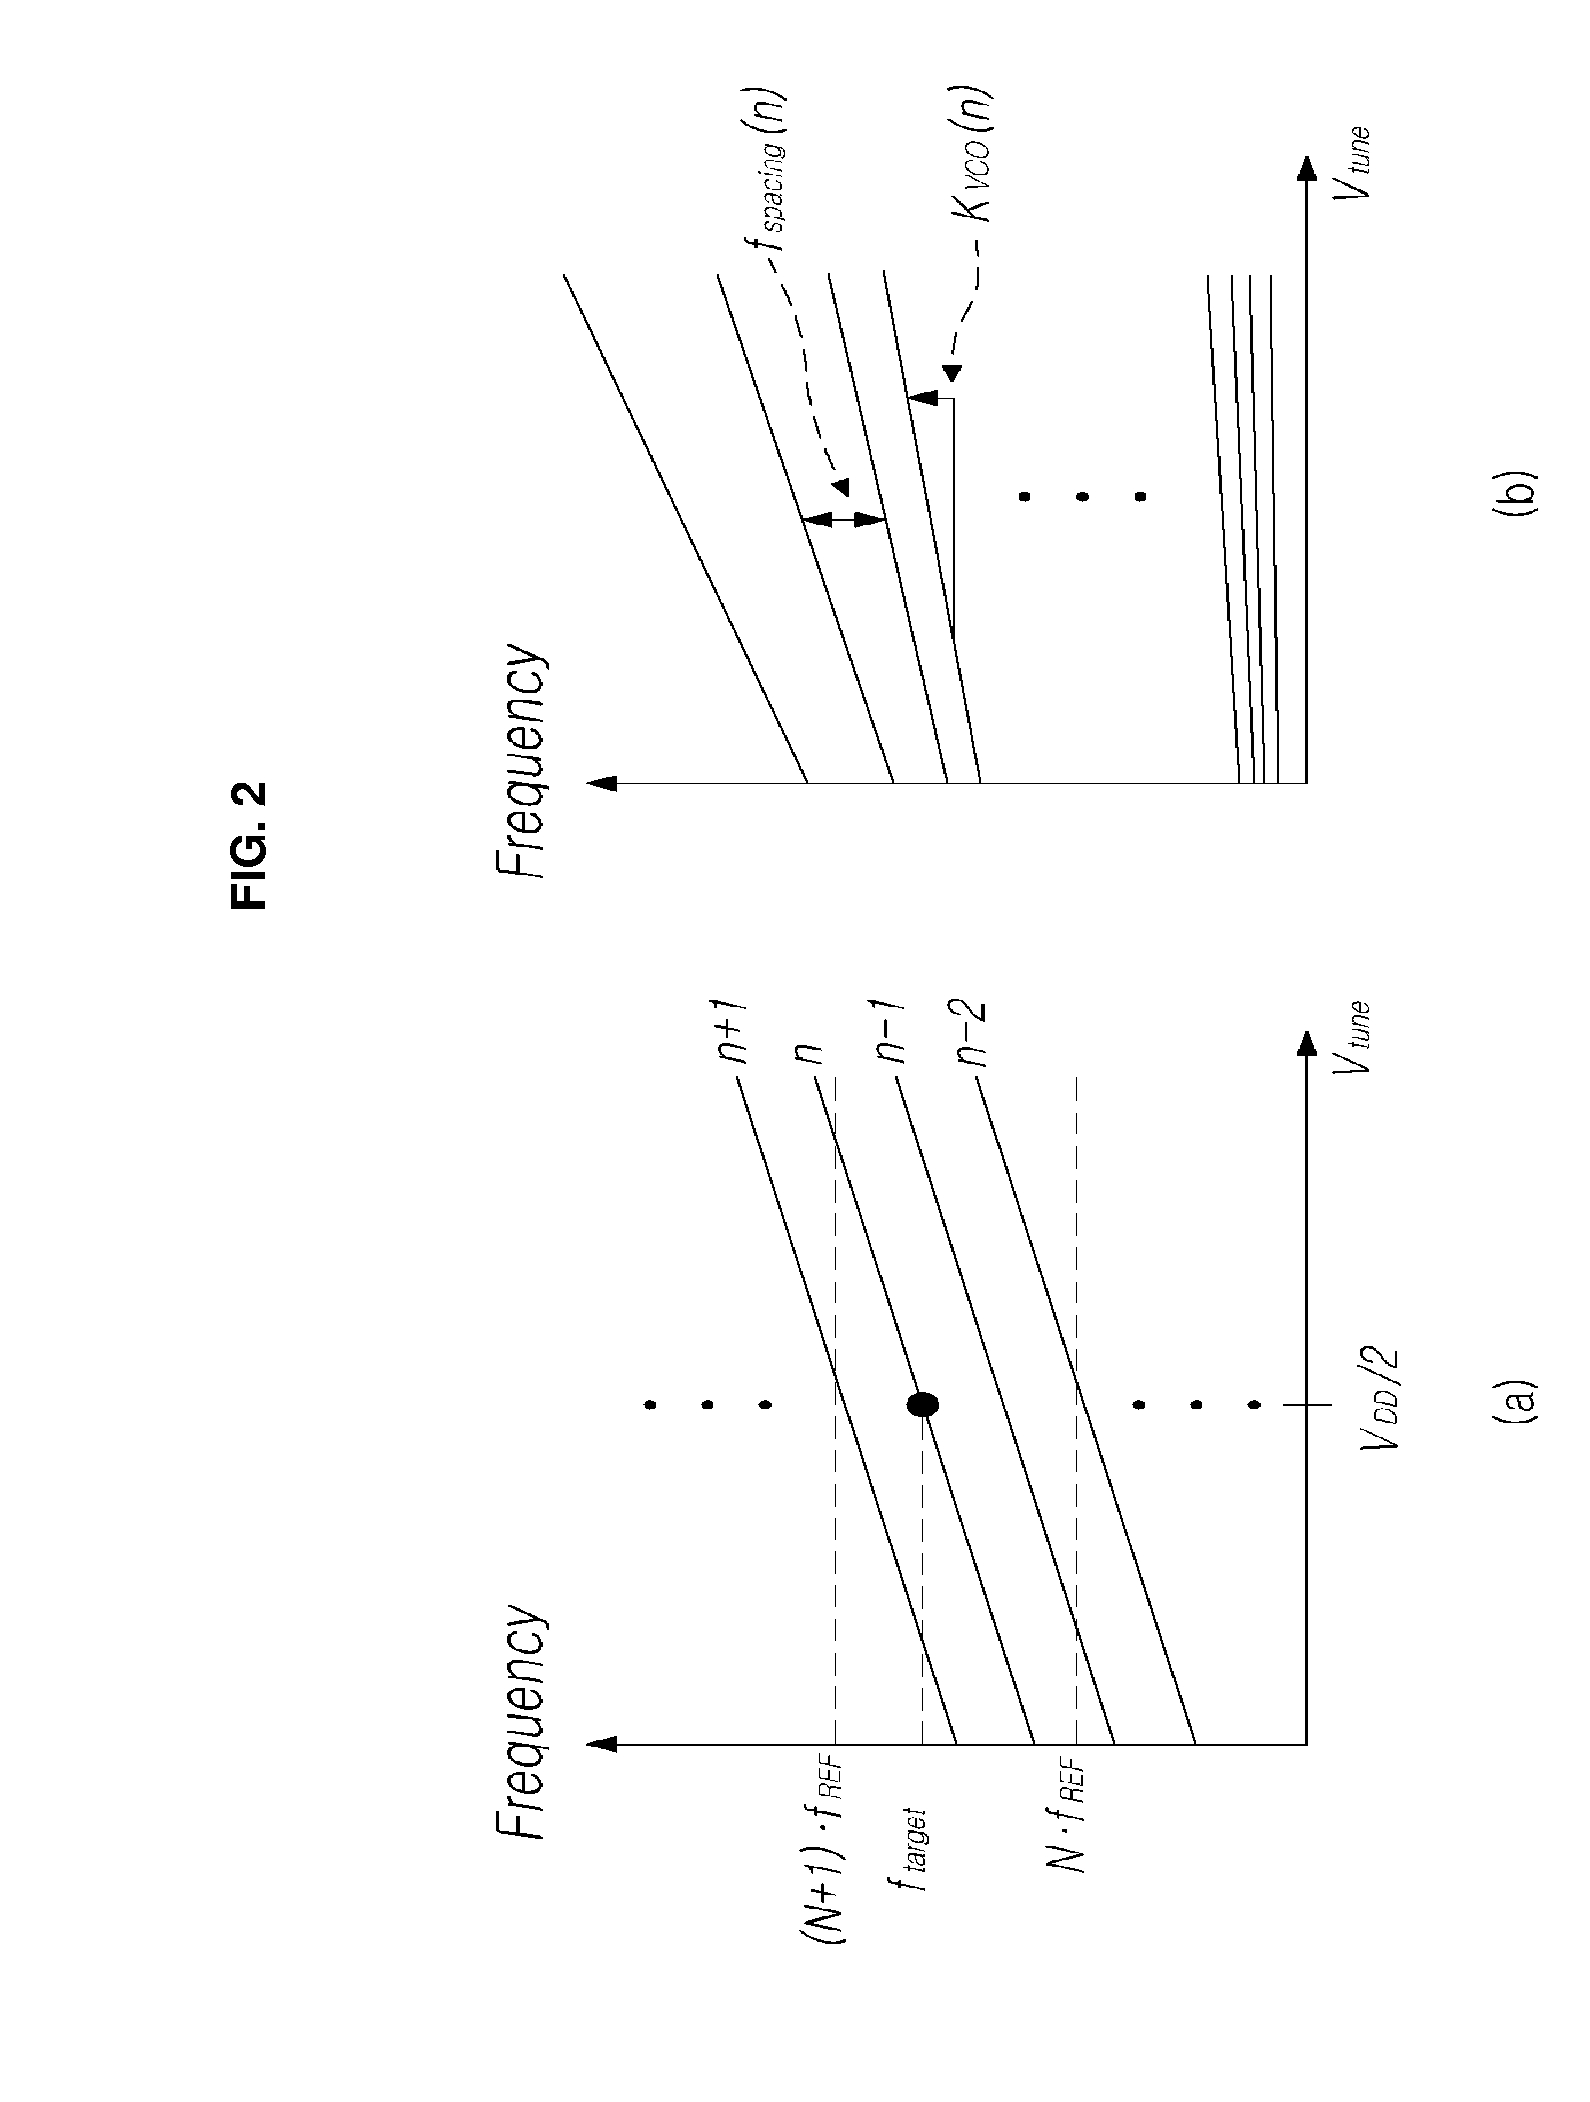 Automatic frequency calibration apparatus and method for a phase-locked loop based frequency synthesizer